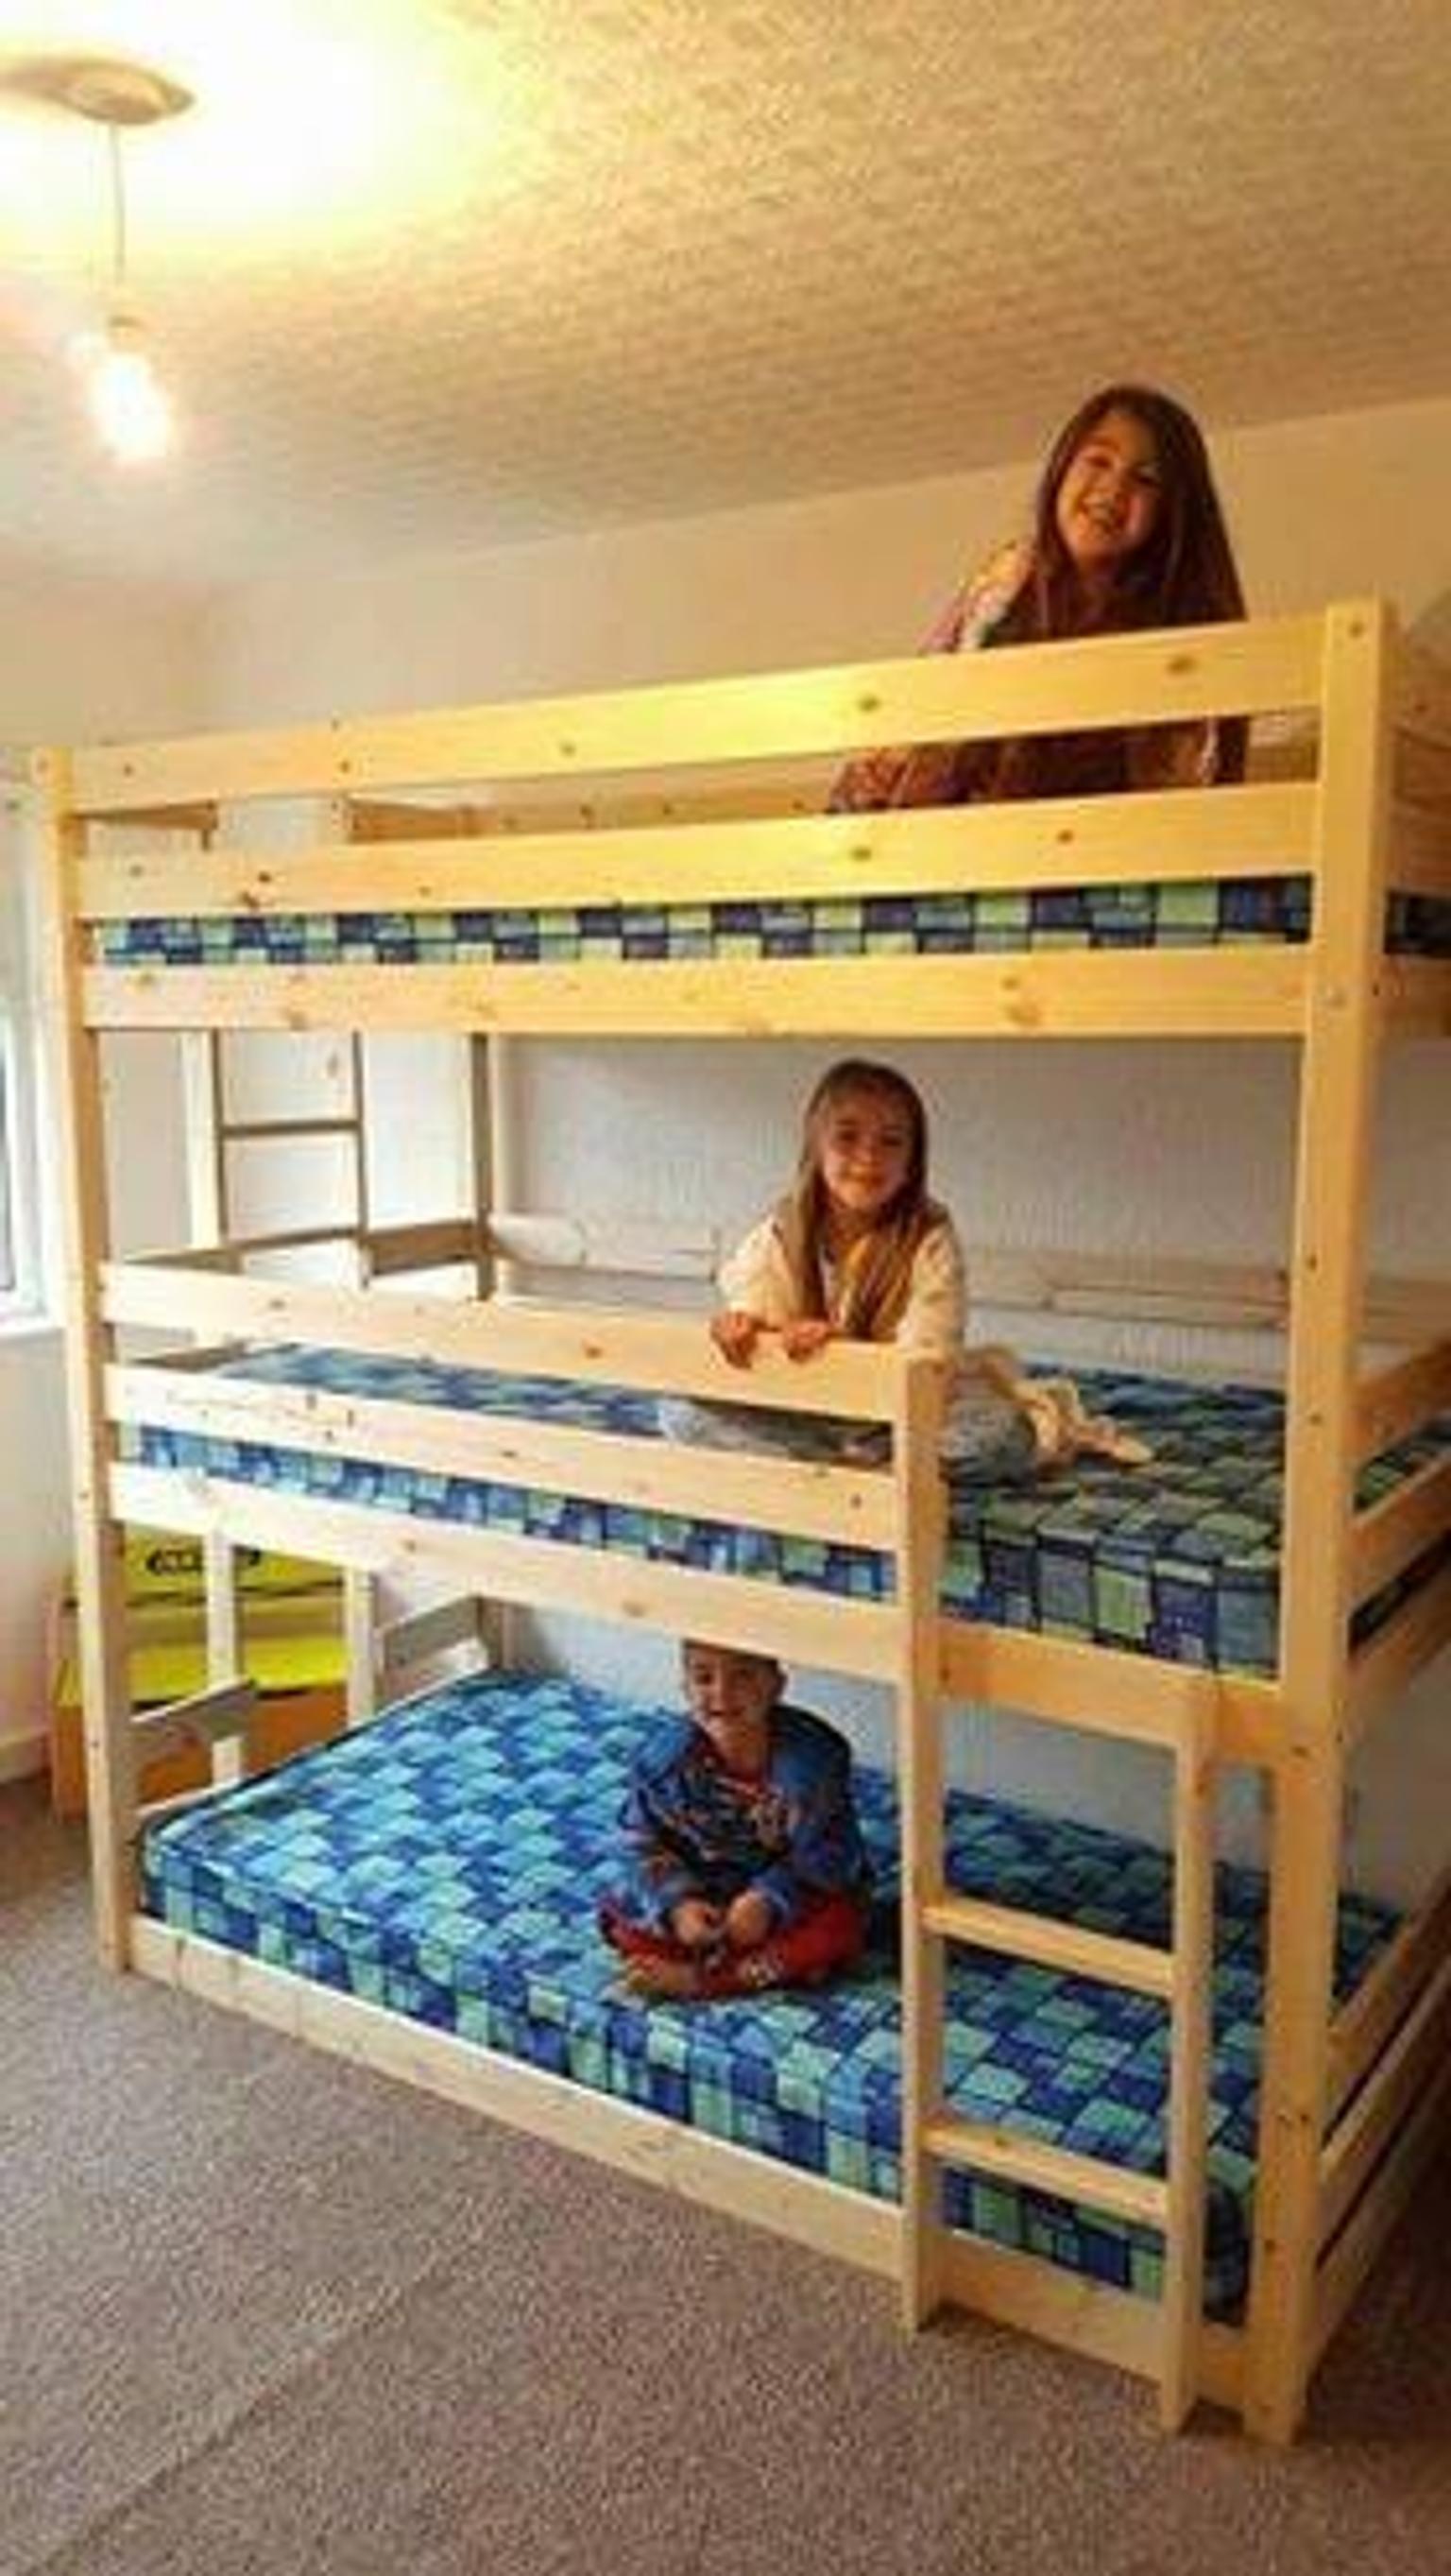 3 Tier Bunk Bed In L35 Helens For 150, Triple Layer Bunk Bed